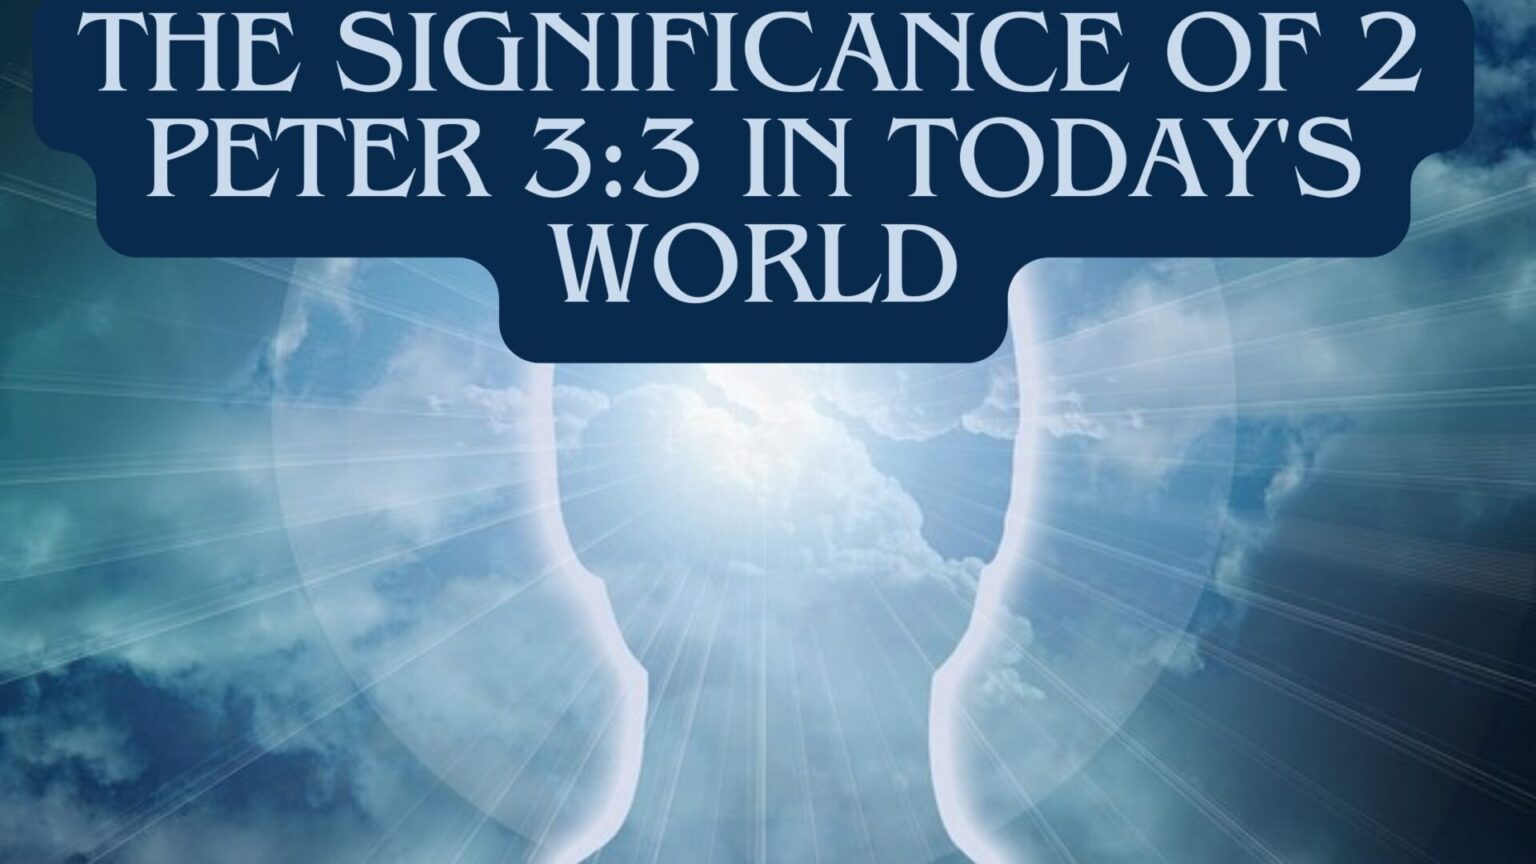 The Significance of 2 Peter 3:3 in Today's World